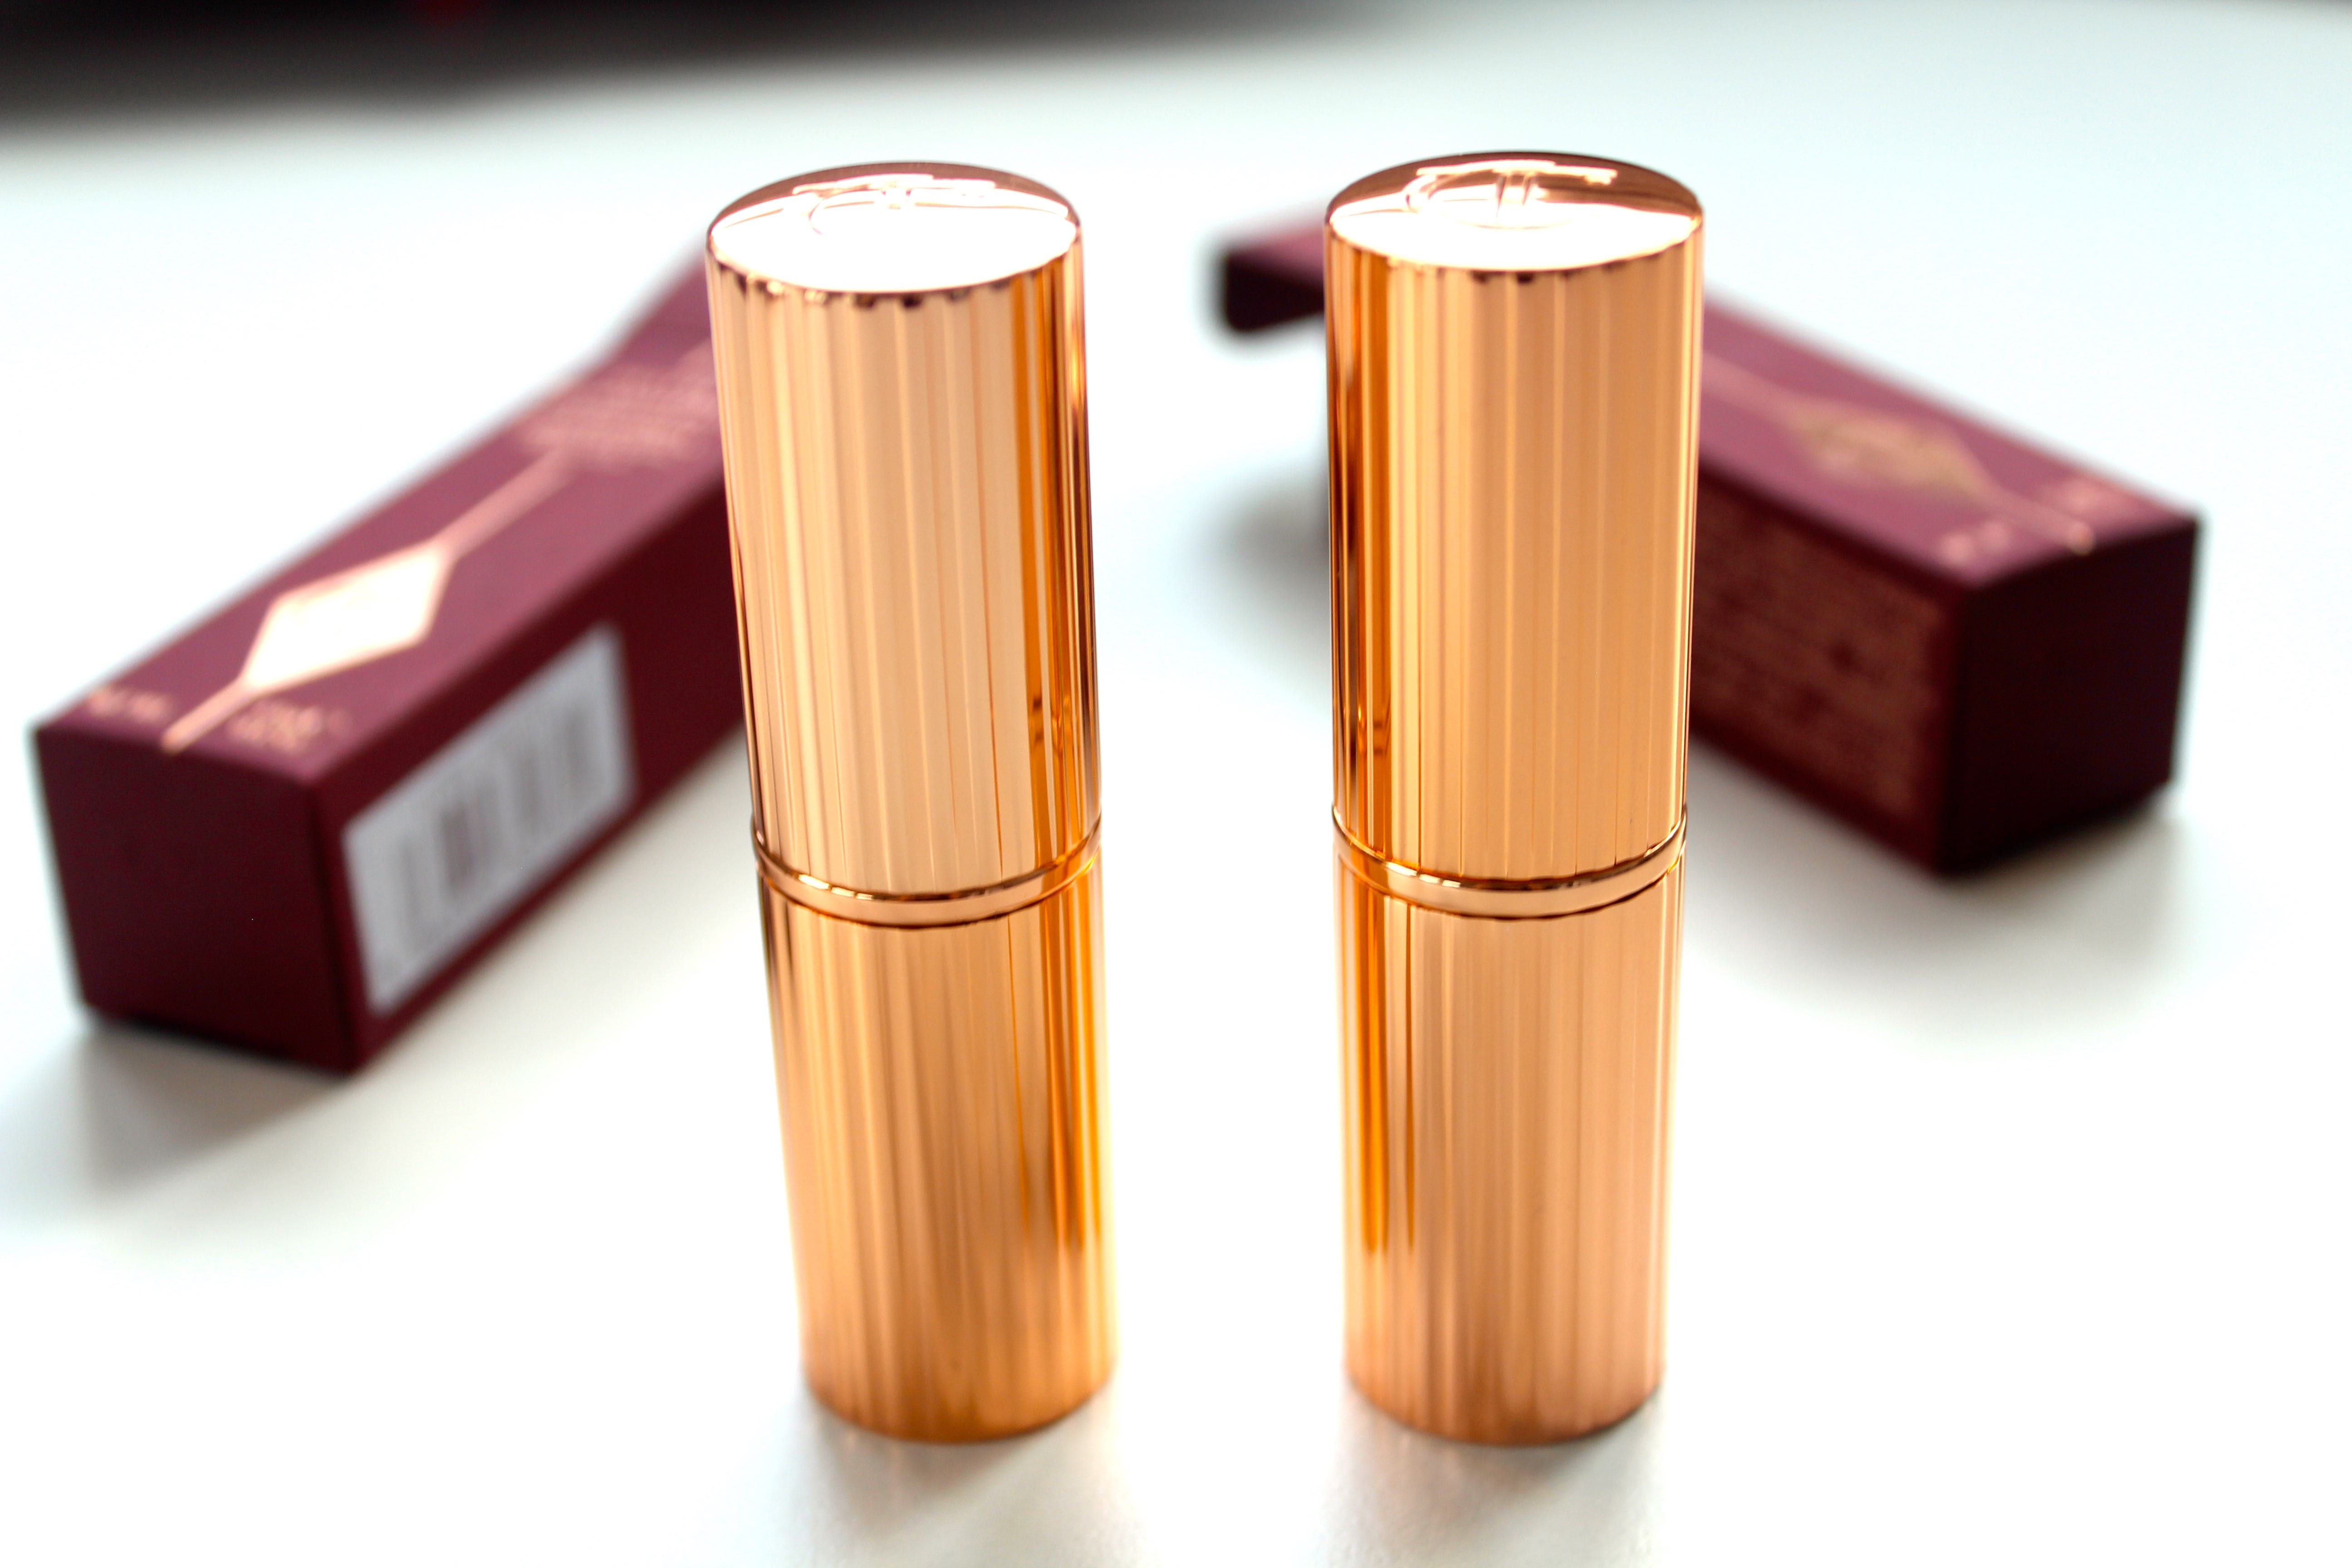 Charlotte-Tilbury-haul-and-product-review-all-in-one-Matte-Revolution-lipsticks-by-face-made-up-facemadeup